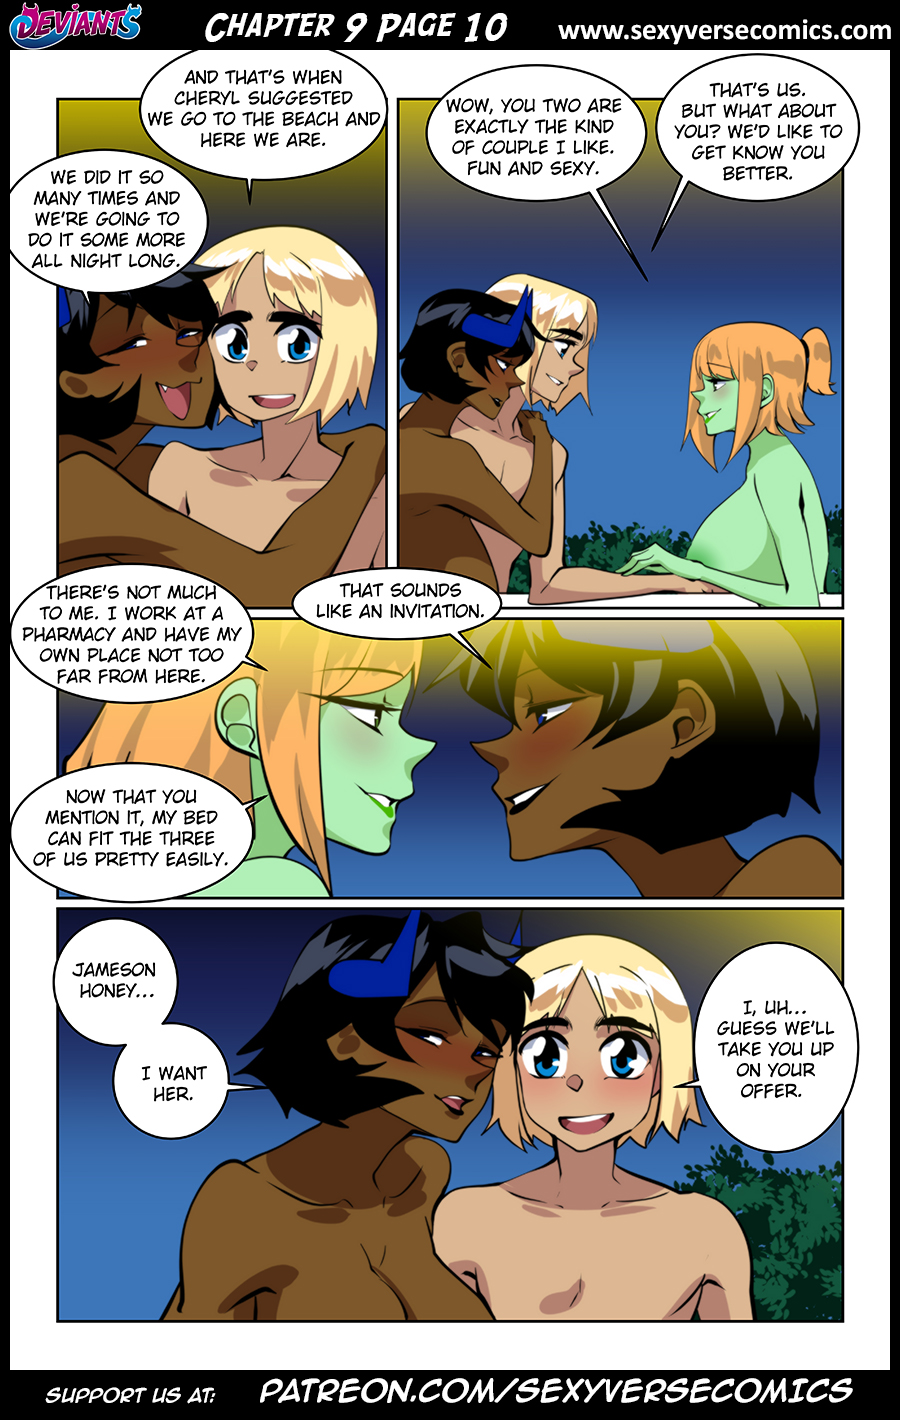 Deviants Chapter 9 Page 10